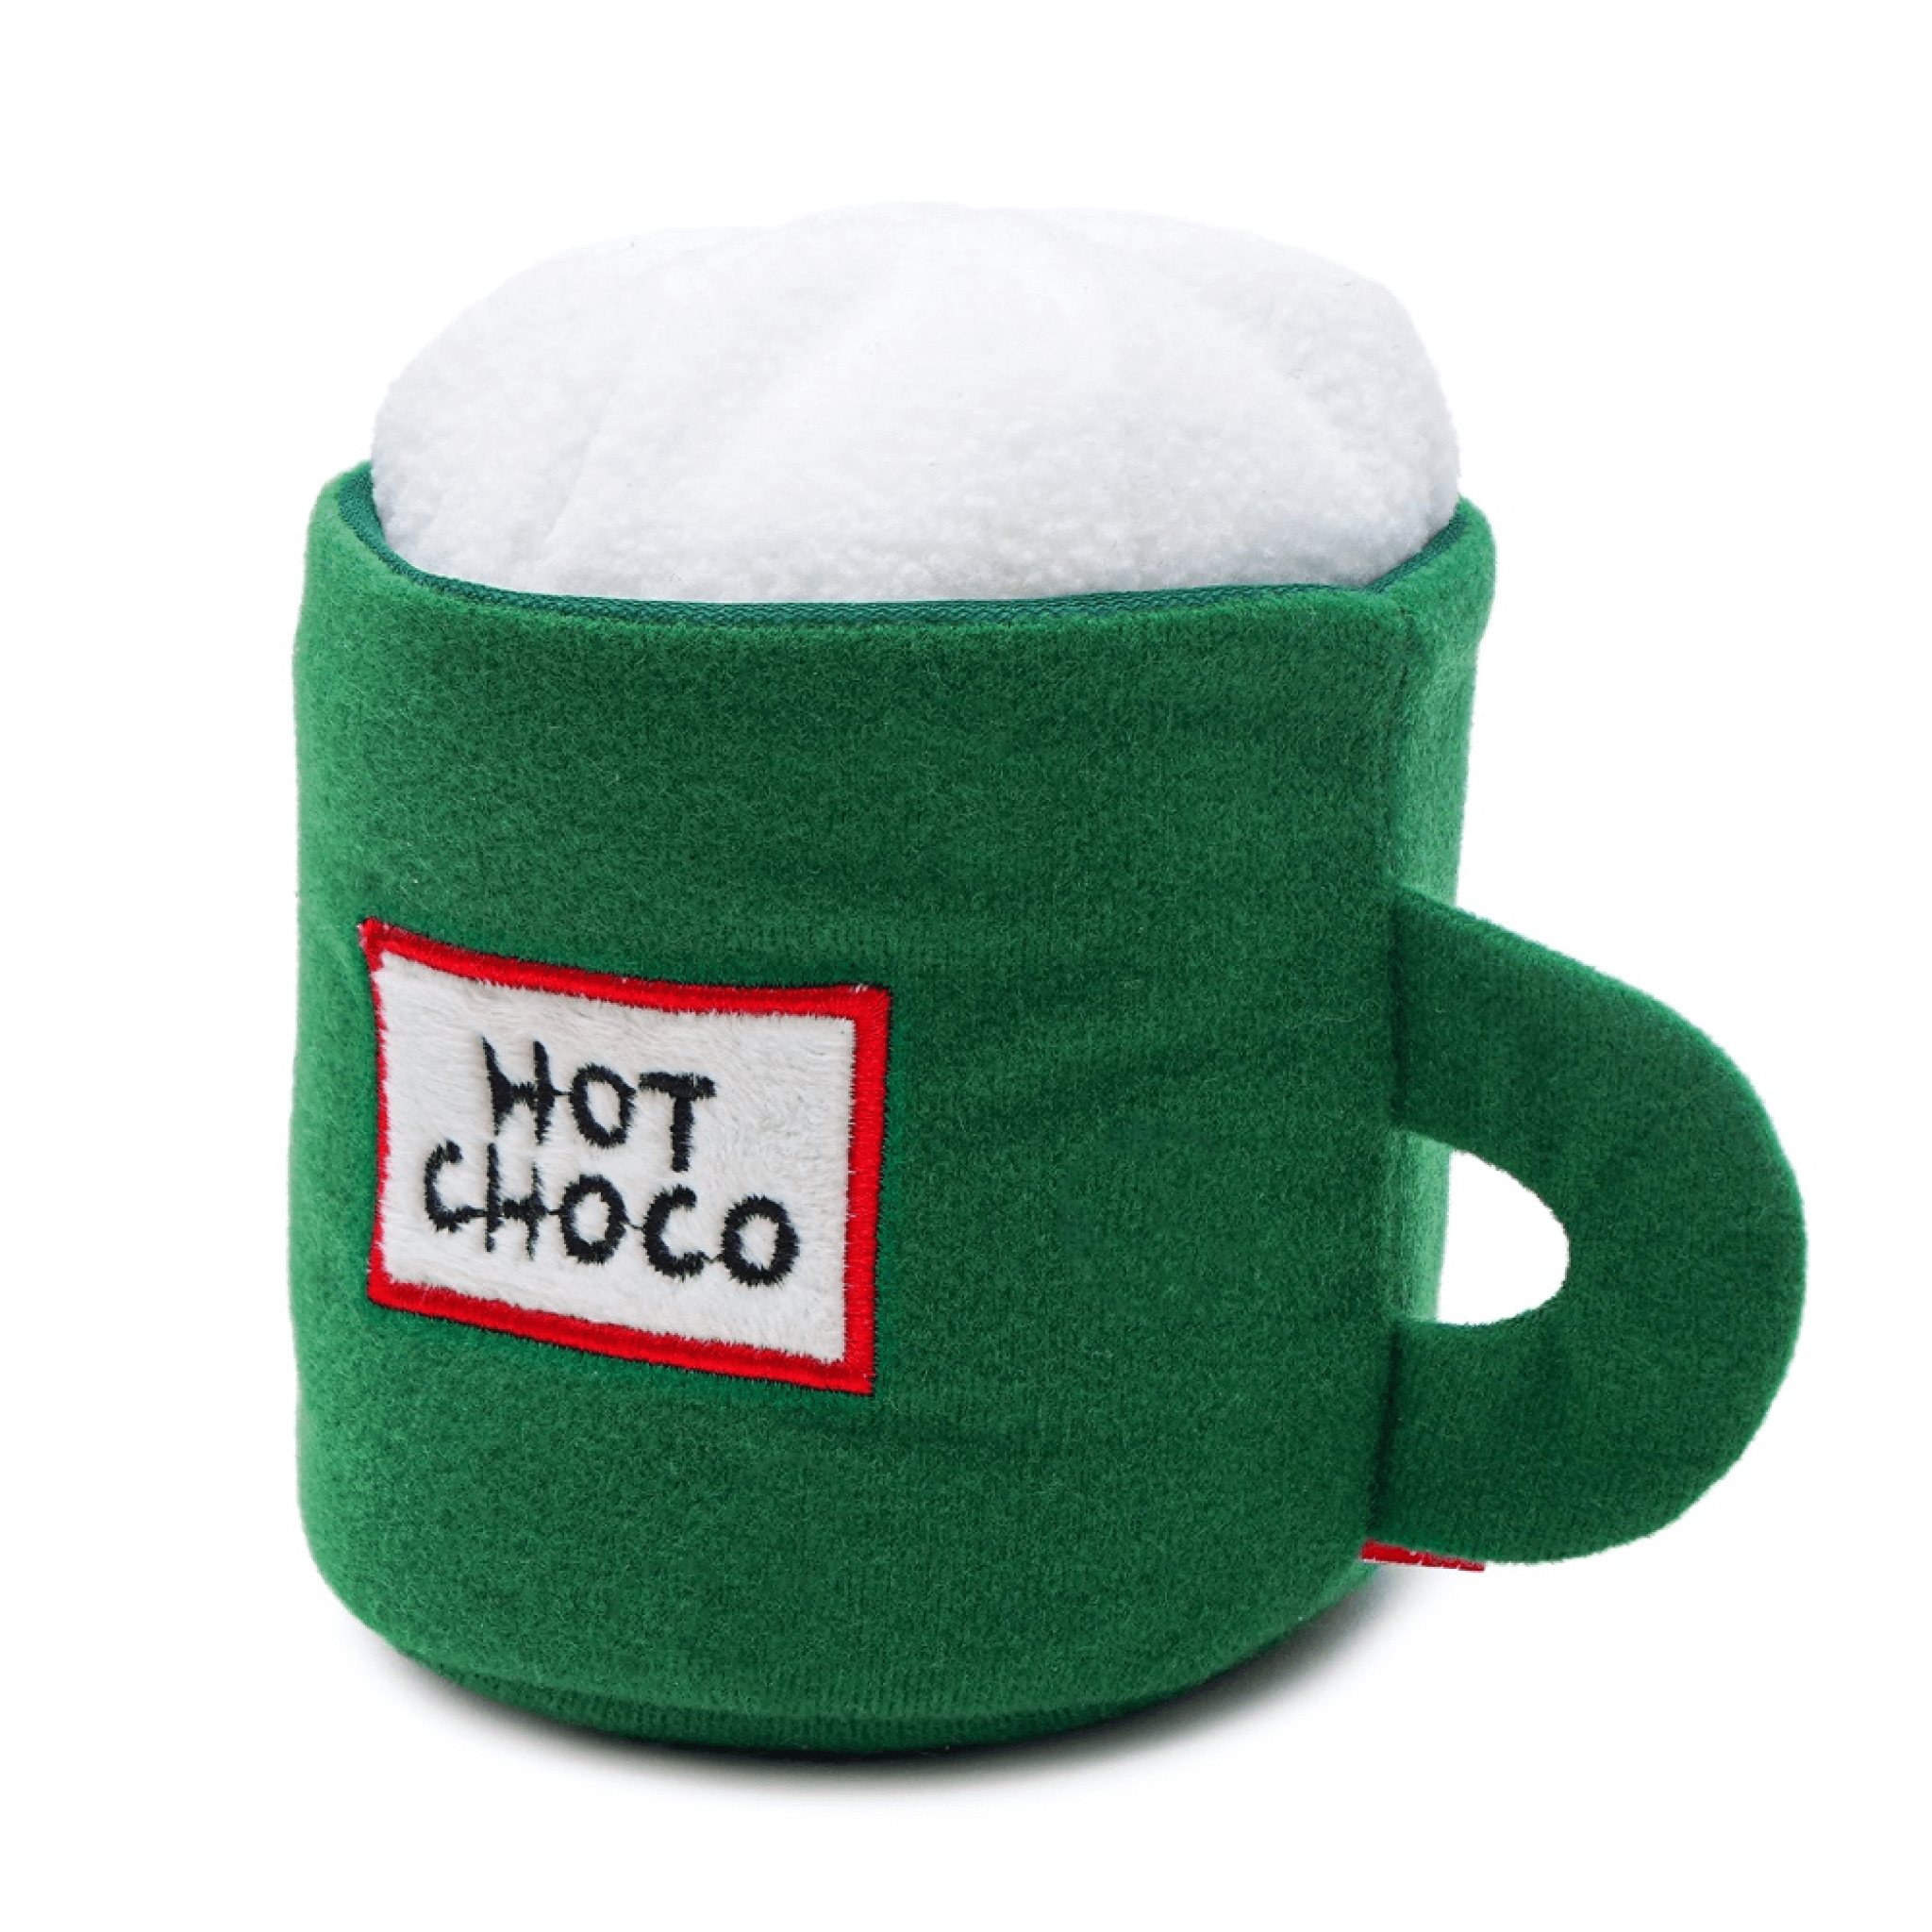 Hot Chocolate Nosework Toy